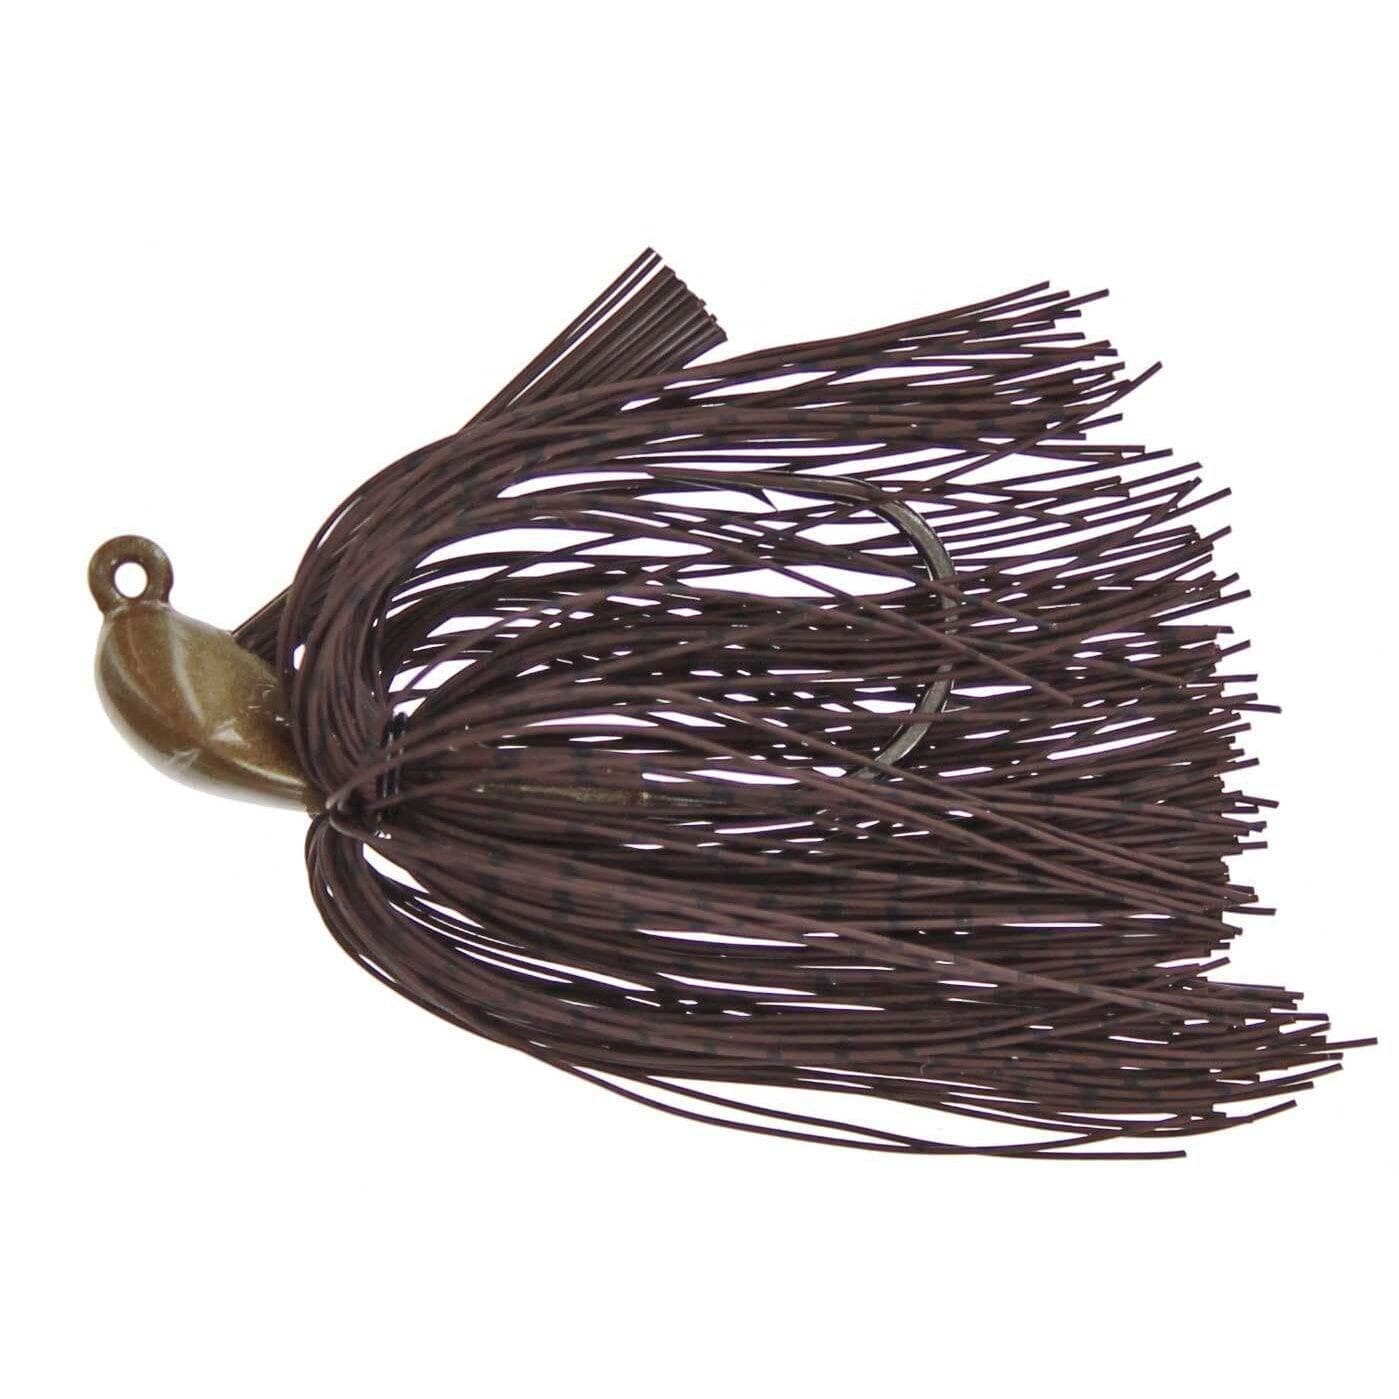 Spotsticker Casting Hand Tied Jig Brown And Black Reptile